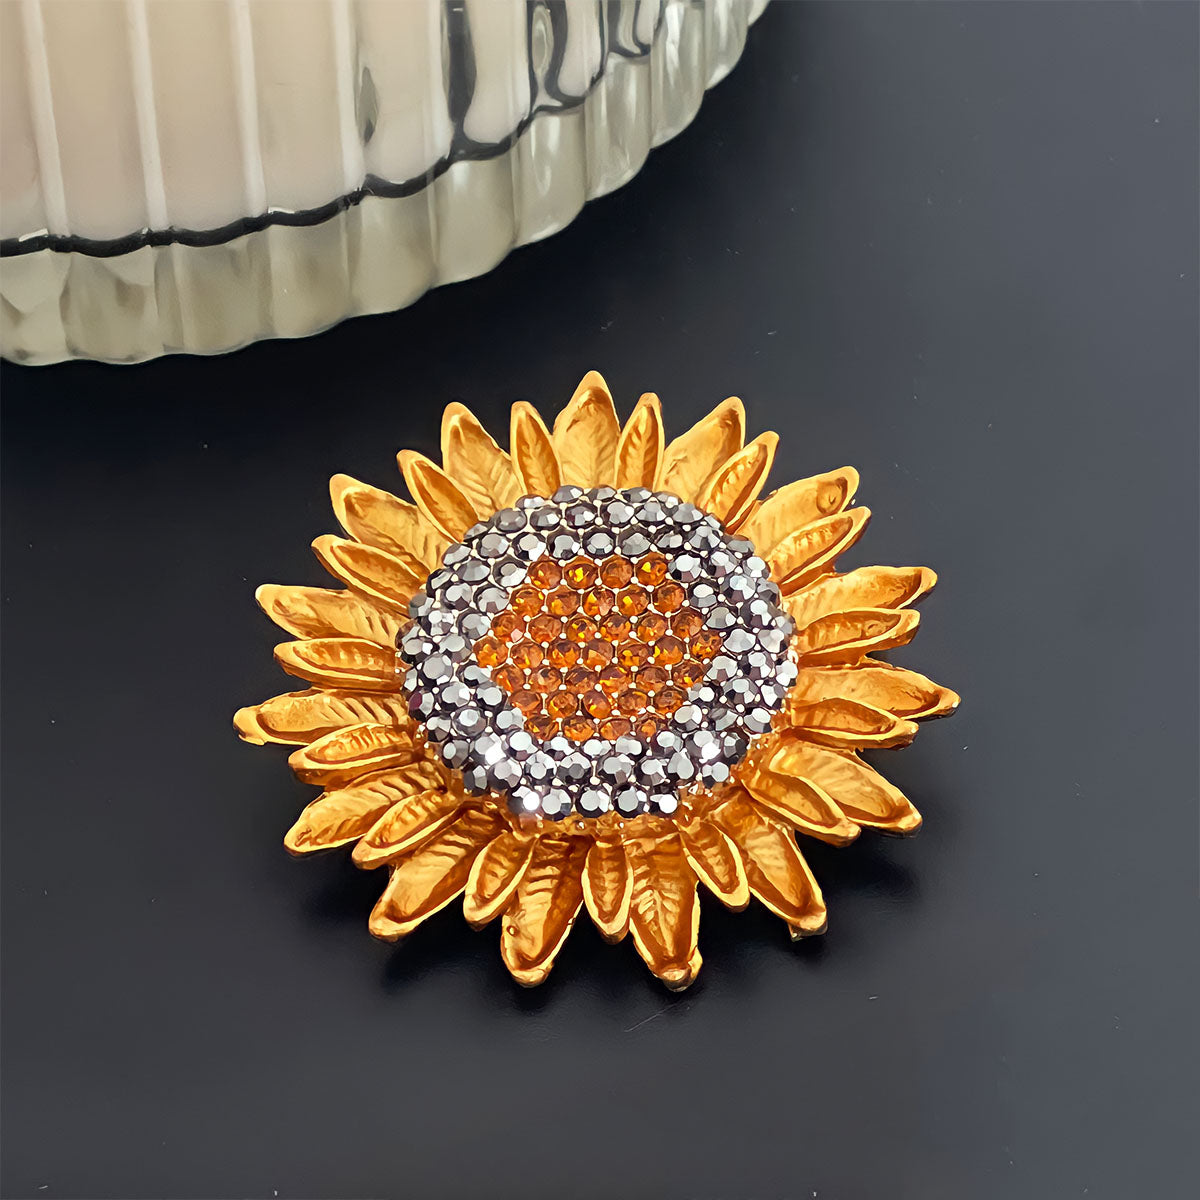 Fall savings Up to 50% off Brooch Pin Vintage nostalgic sunflower brooch  for women jewelry Gifts for Family on Clearance